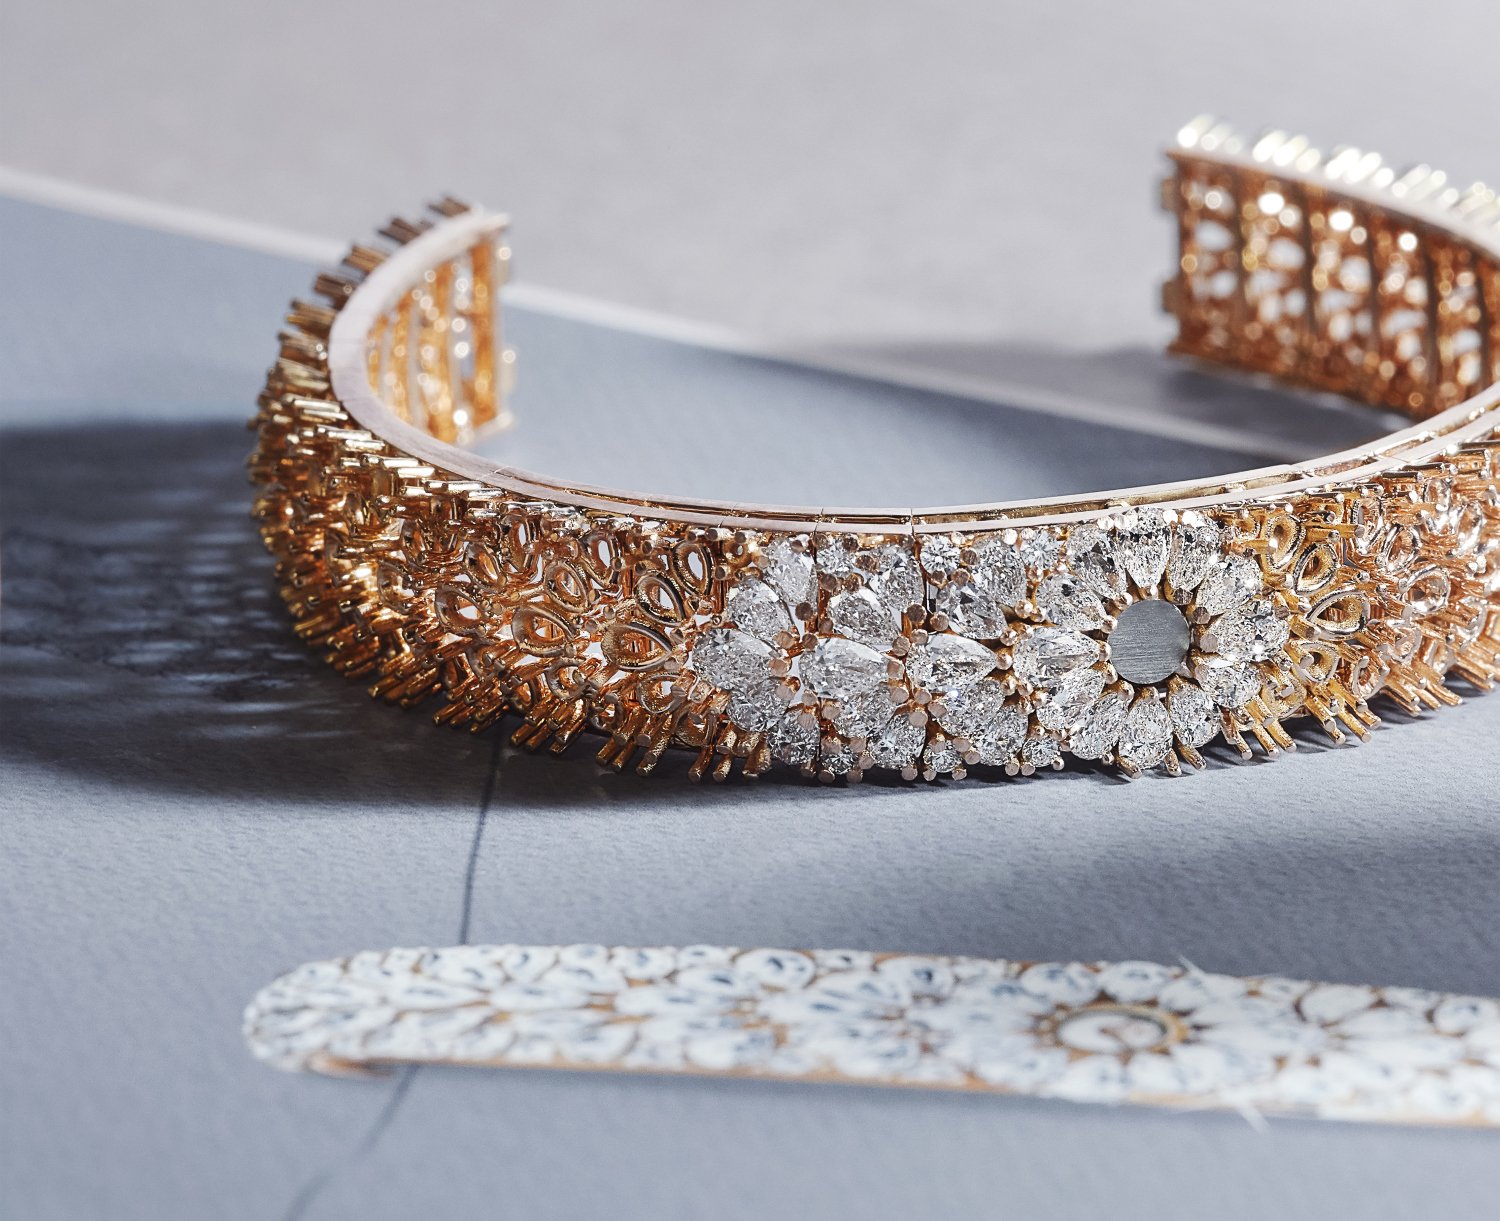 Jaeger-LeCoultre: two new High Jewellery watches